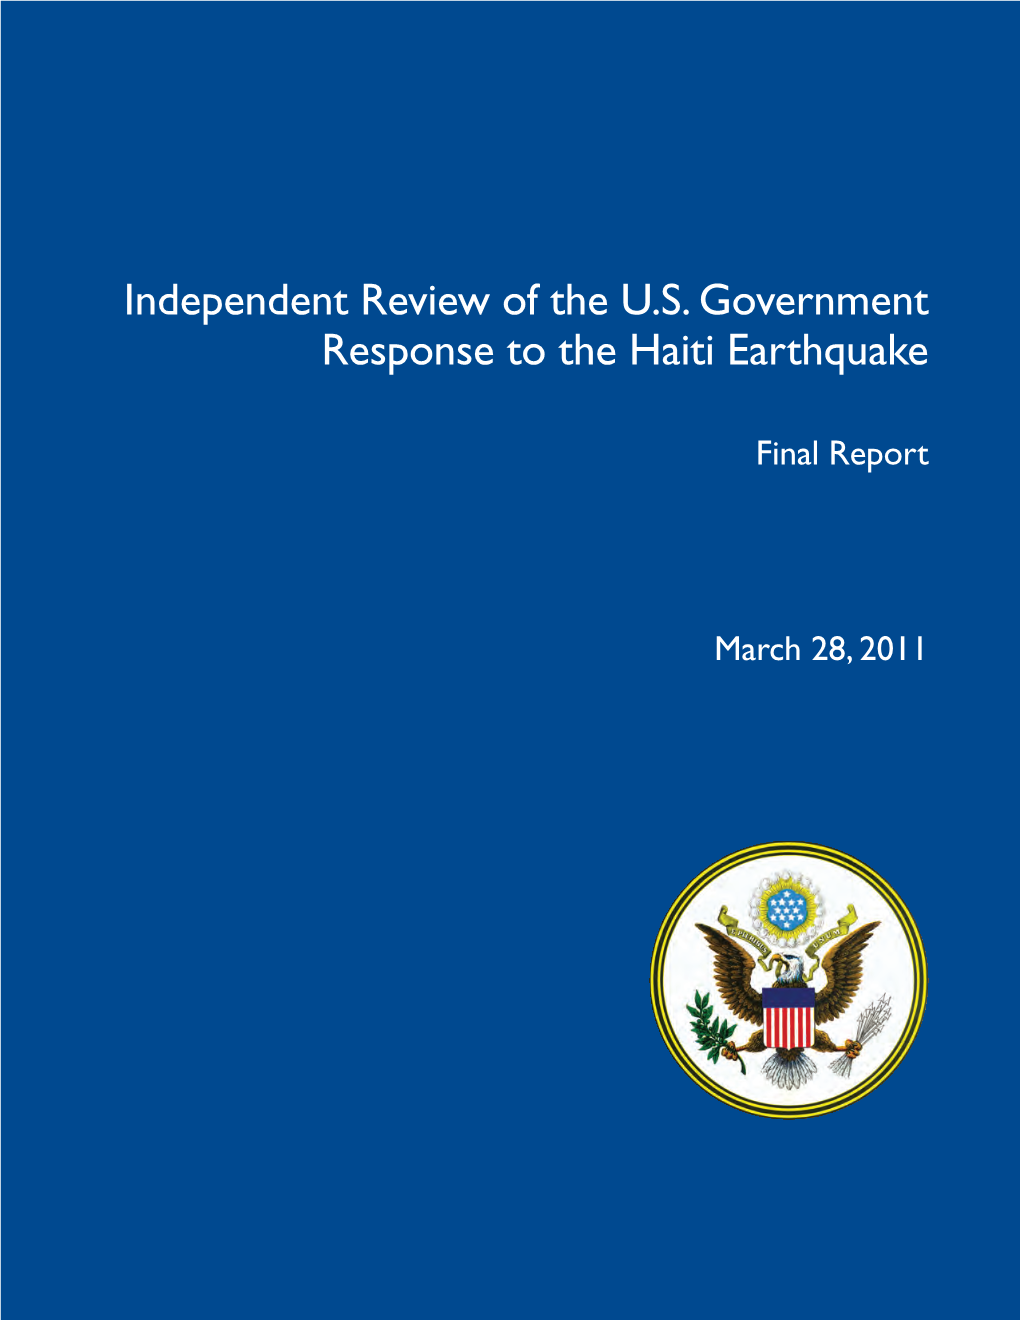 Independent Review of the U.S. Government Response to the Haiti Earthquake